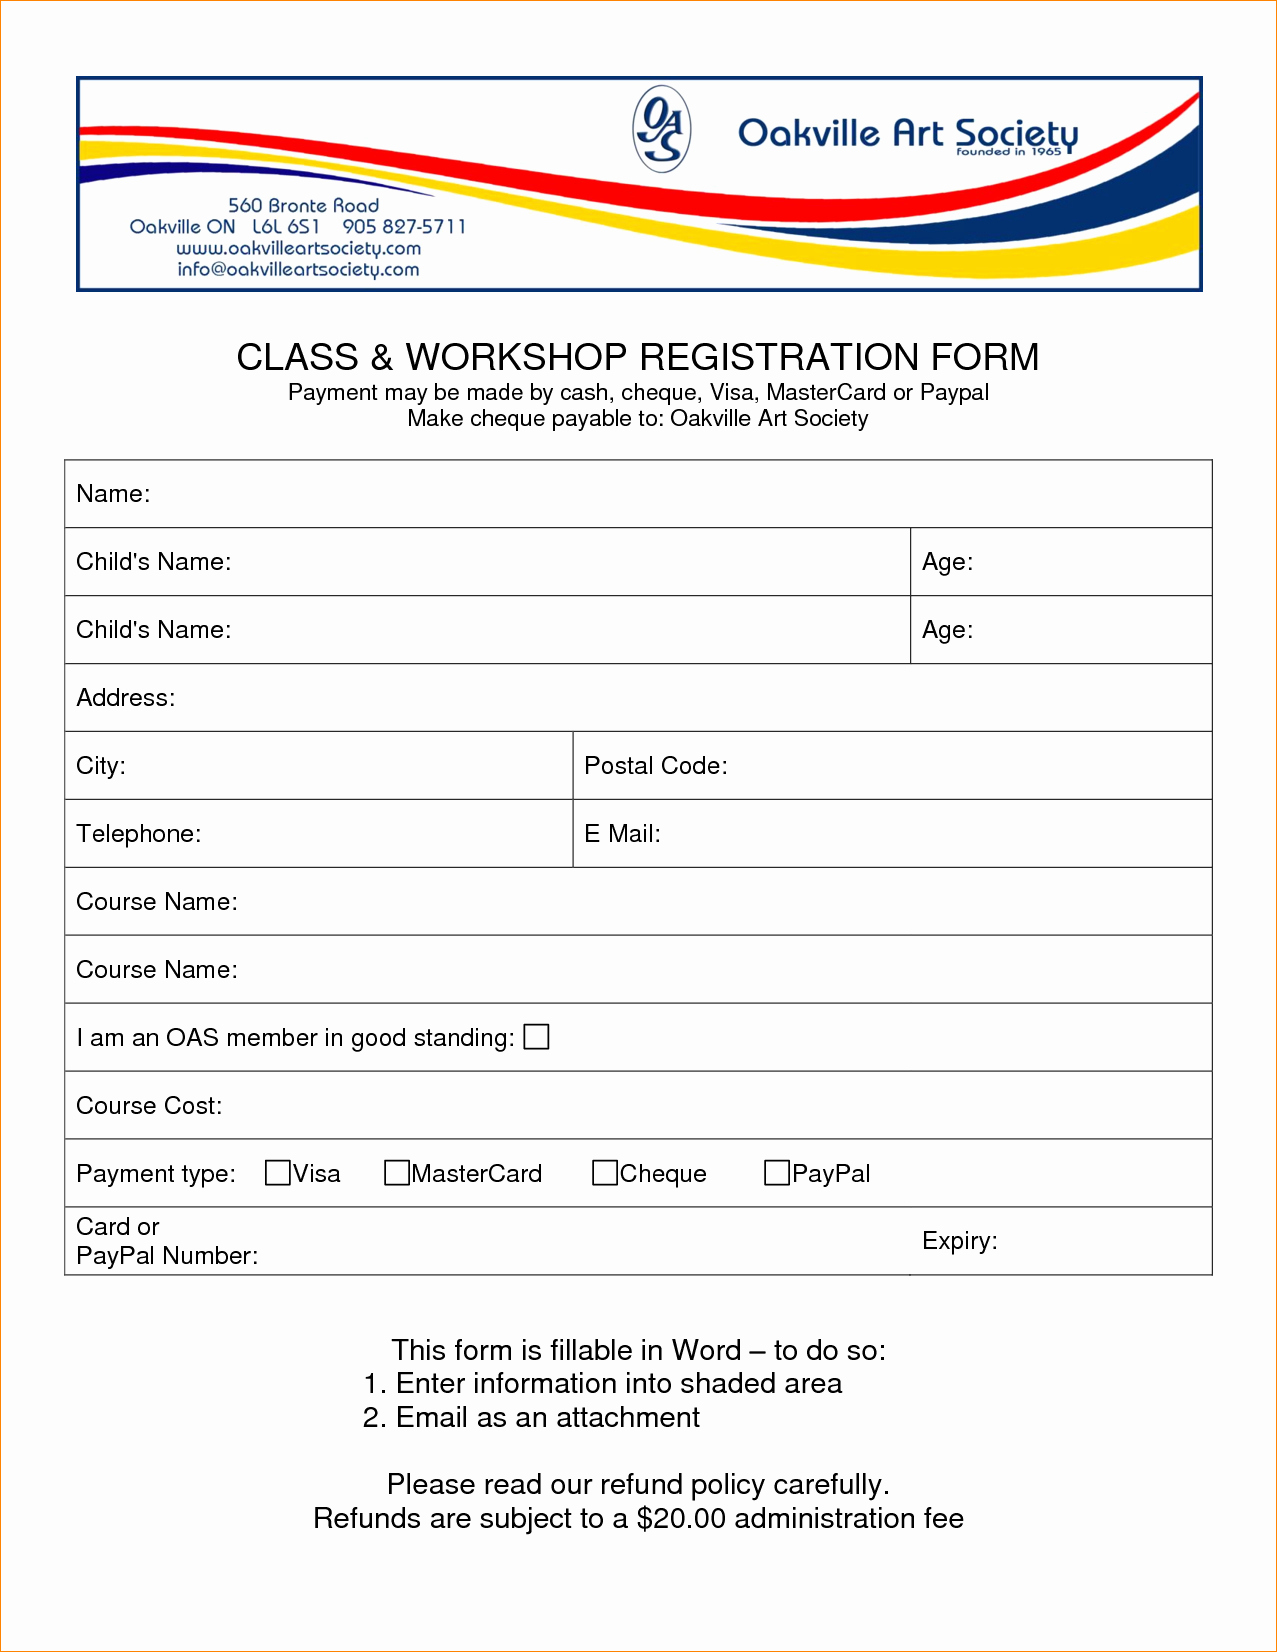 Event Registration form Template New event Registration form Template Word Bamboodownunder